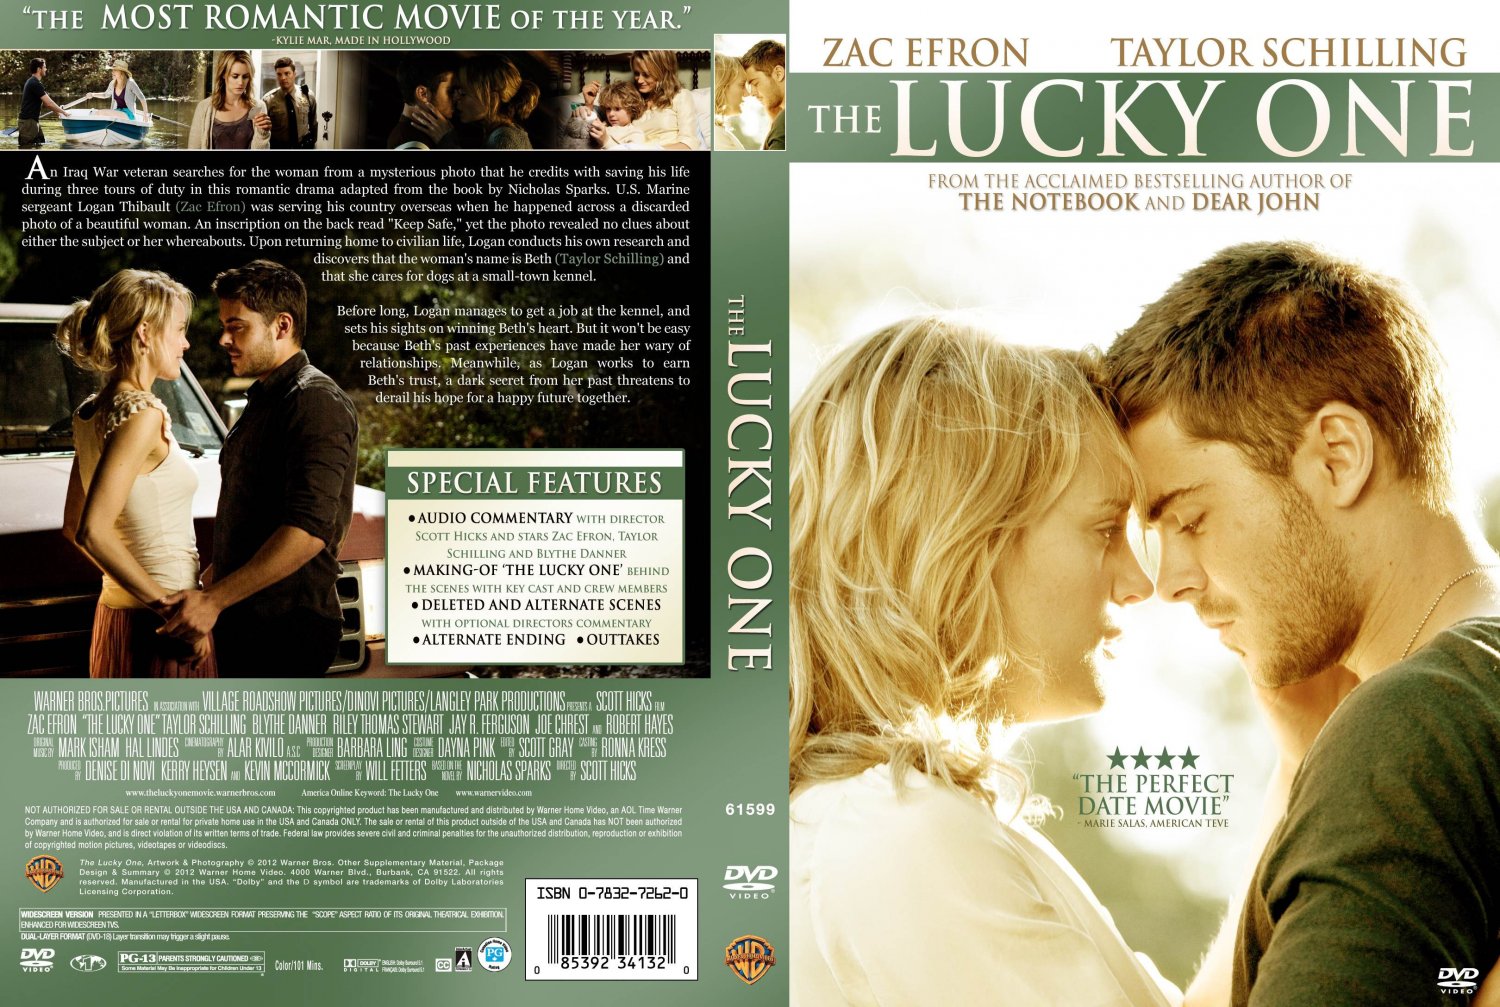 The lucky one by nicholas sparks book report